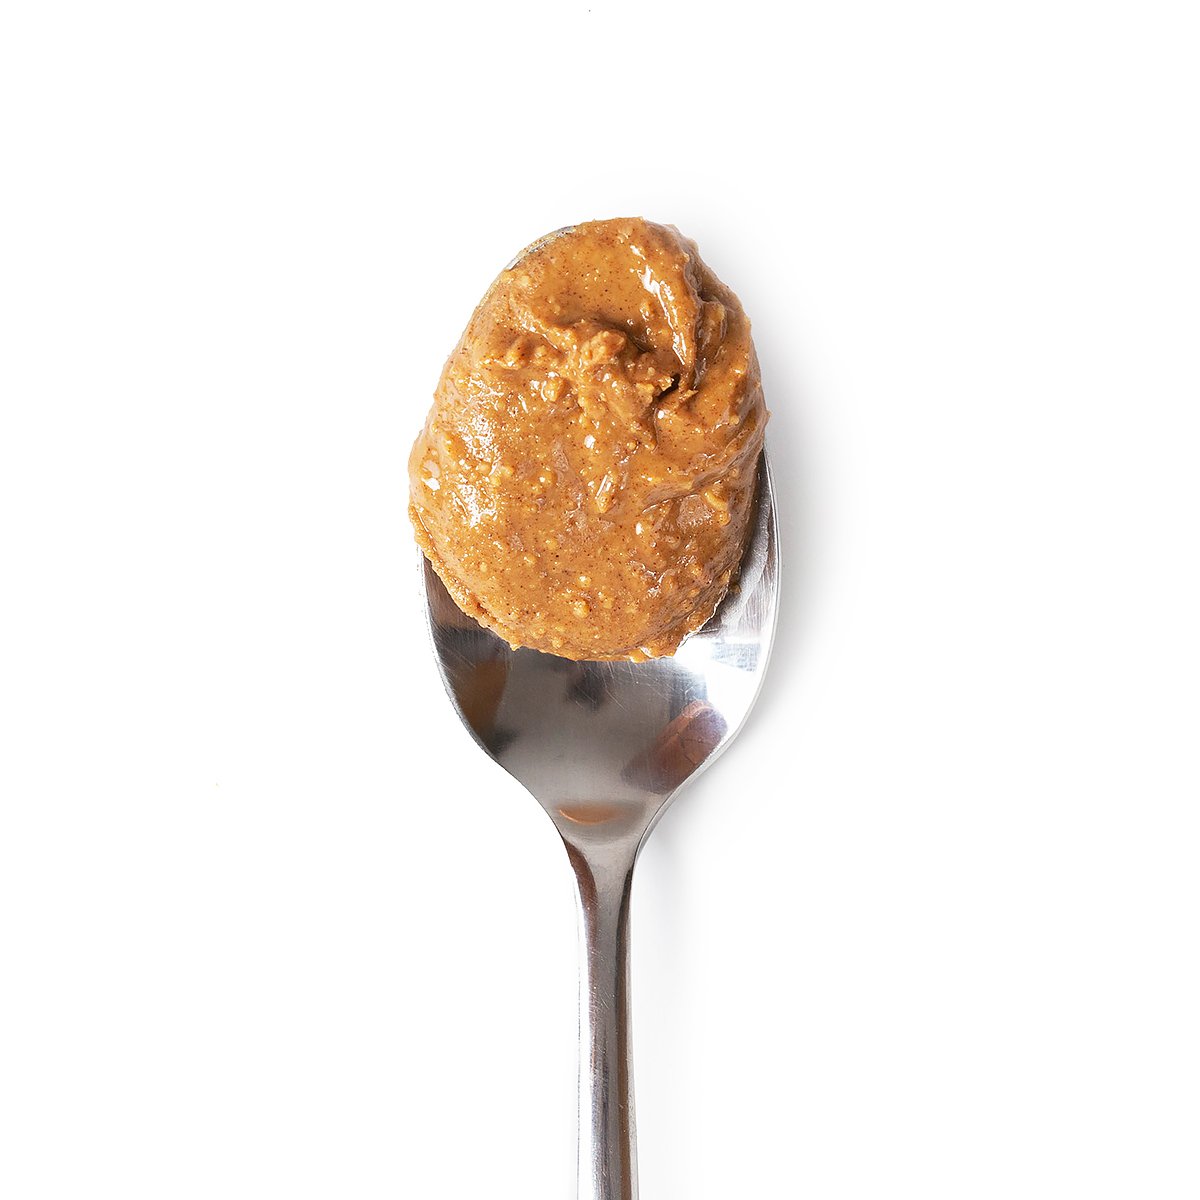 Pet Boutique - Dog Dining - Dog Treats - Pumpkin Spice Peanut Butter for Dogs by Big Spoon Roasters